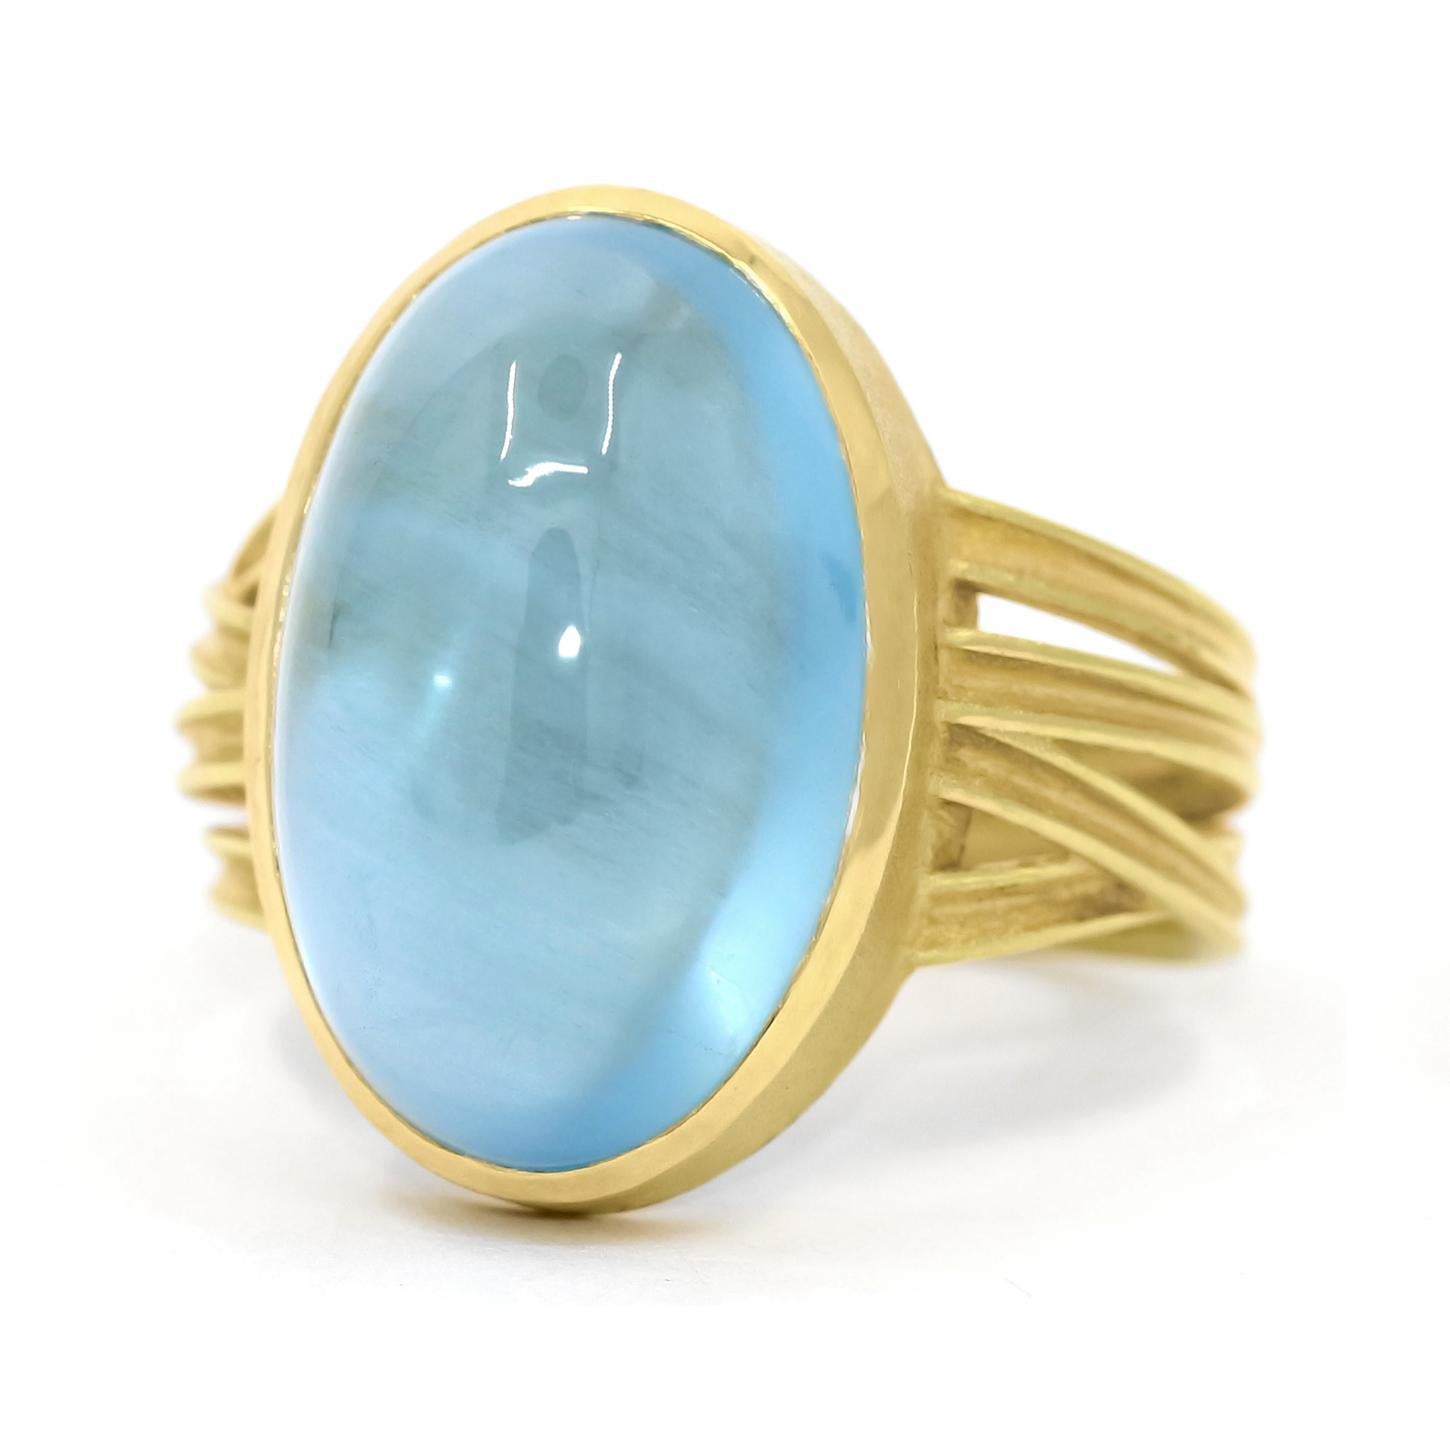 One of a Kind Ribbon Wrap Ring handmade by acclaimed jewelry artist Barbara Heinrich showcasing an exceptional 13.99 carat gem aquamarine oval cabochon that radiates light from within, bezel-set in Barbara's signature-finished 18k yellow gold atop